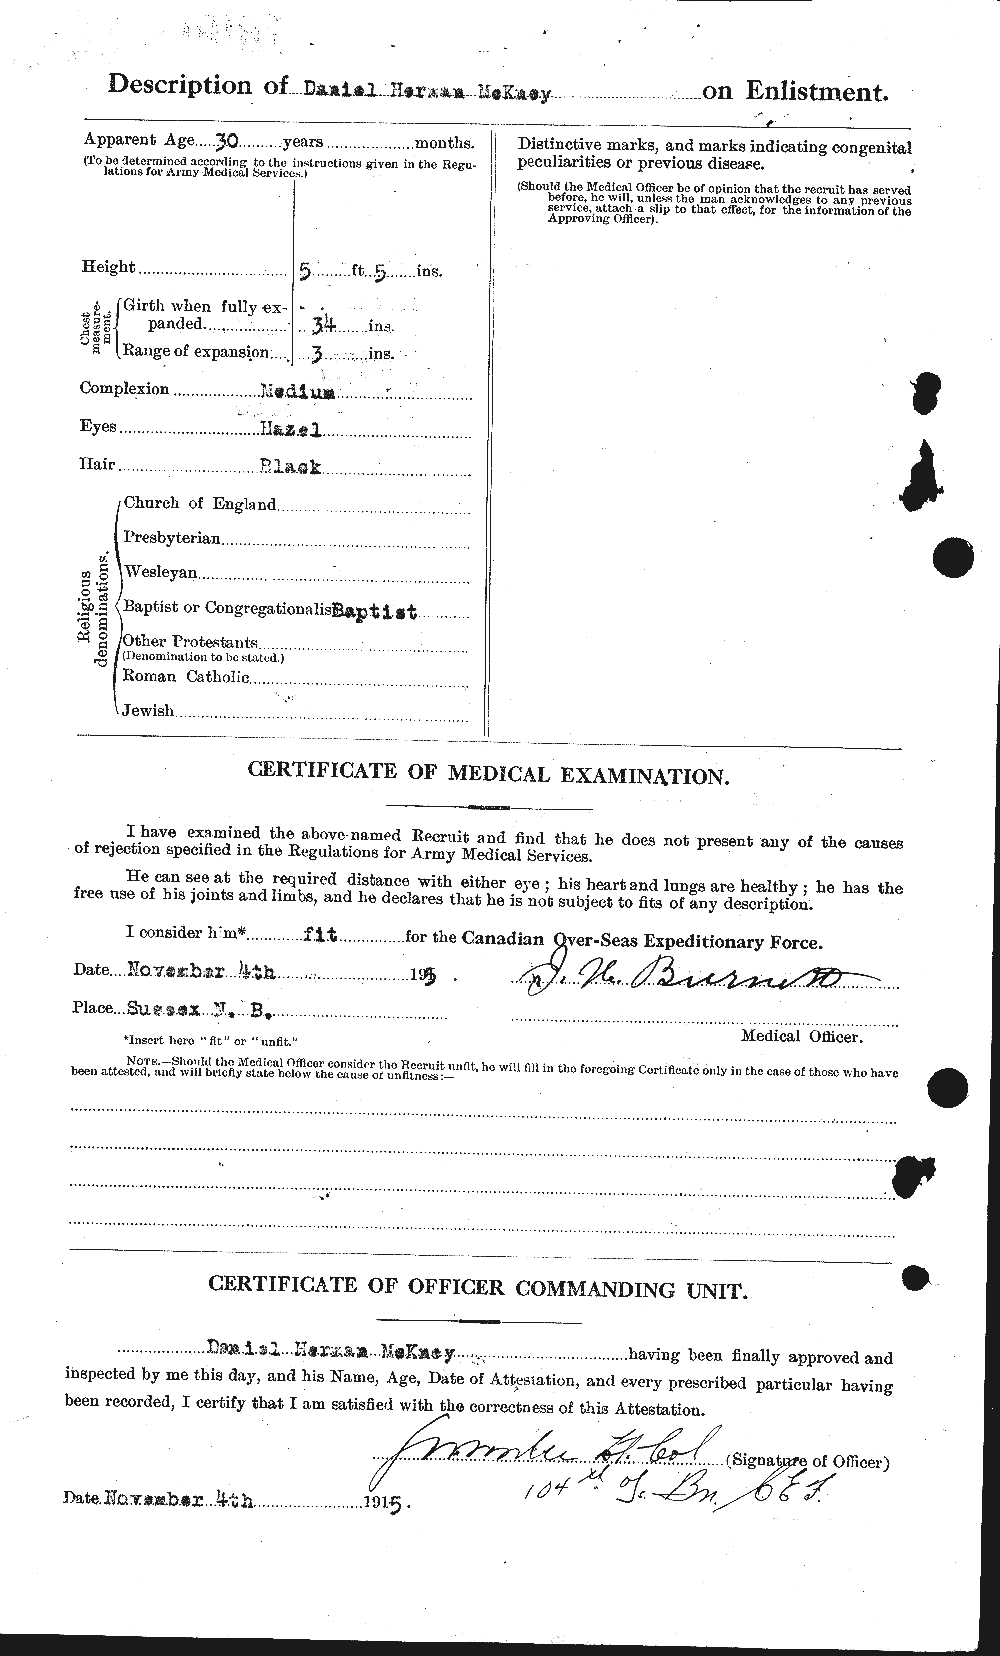 Personnel Records of the First World War - CEF 530677b